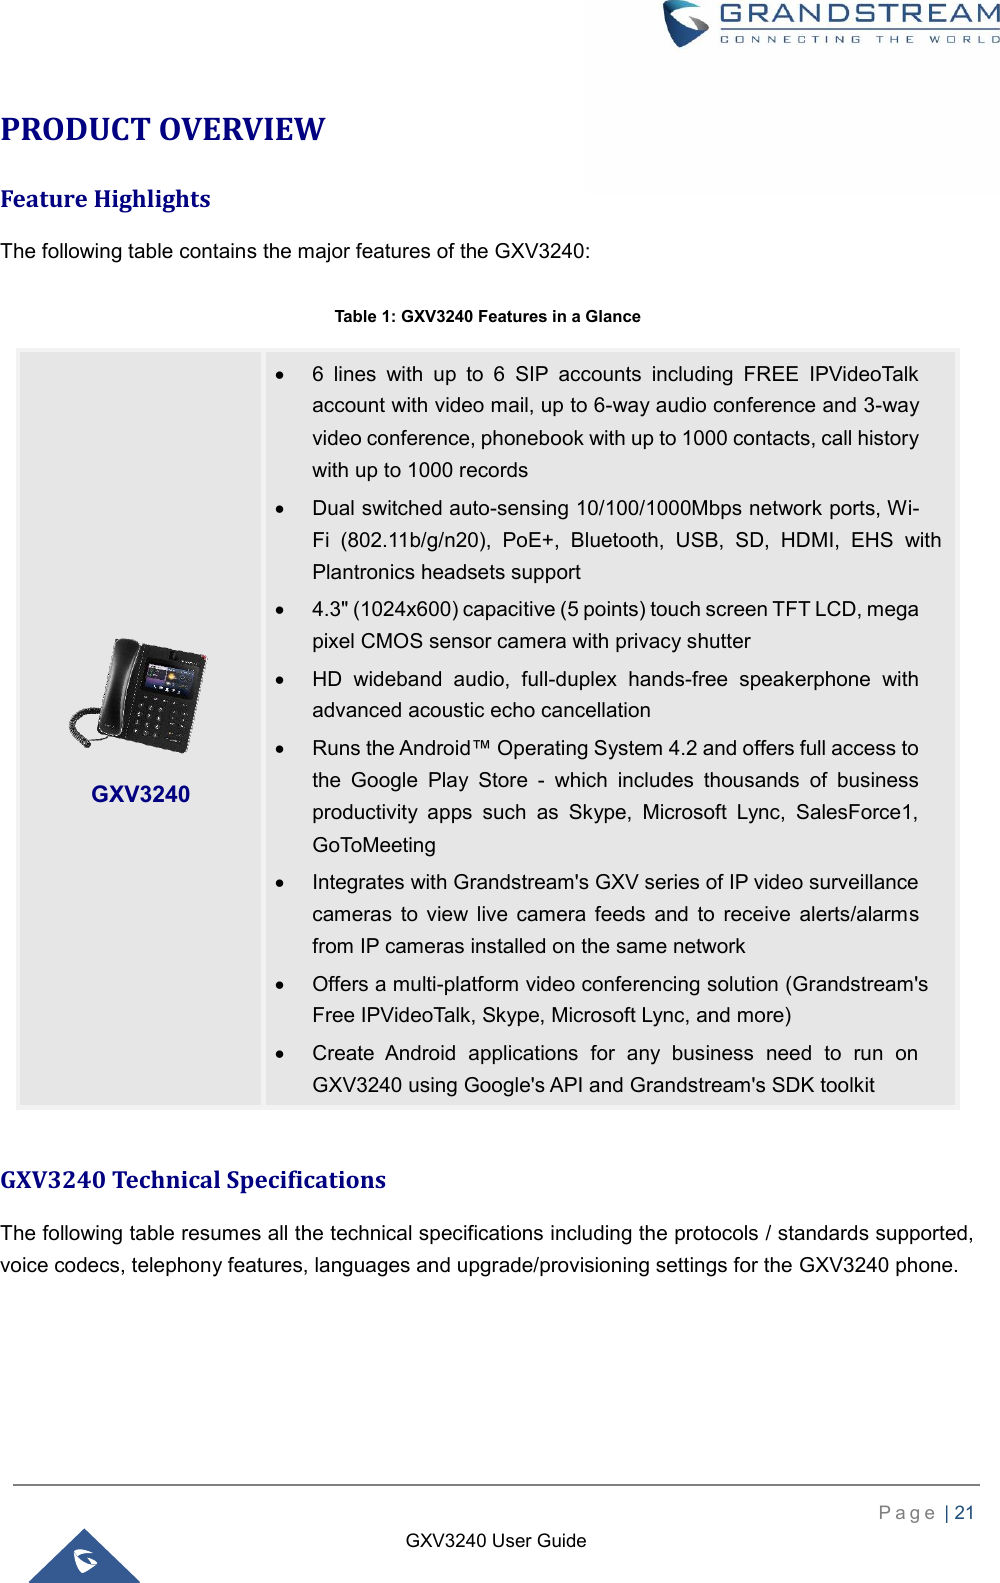    P a g e  | 21    GXV3240 User Guide  PRODUCT OVERVIEW Feature Highlights The following table contains the major features of the GXV3240:  Table 1: GXV3240 Features in a Glance  GXV3240 Technical Specifications The following table resumes all the technical specifications including the protocols / standards supported, voice codecs, telephony features, languages and upgrade/provisioning settings for the GXV3240 phone.   GXV3240    6  lines  with  up  to  6  SIP  accounts  including  FREE  IPVideoTalk account with video mail, up to 6-way audio conference and 3-way video conference, phonebook with up to 1000 contacts, call history with up to 1000 records   Dual switched auto-sensing 10/100/1000Mbps network ports, Wi-Fi  (802.11b/g/n20),  PoE+,  Bluetooth,  USB,  SD,  HDMI,  EHS  with Plantronics headsets support   4.3&quot; (1024x600) capacitive (5 points) touch screen TFT LCD, mega pixel CMOS sensor camera with privacy shutter   HD  wideband  audio,  full-duplex  hands-free  speakerphone  with advanced acoustic echo cancellation   Runs the Android™ Operating System 4.2 and offers full access to the  Google  Play  Store  -  which  includes  thousands  of  business productivity  apps  such  as  Skype,  Microsoft  Lync,  SalesForce1, GoToMeeting   Integrates with Grandstream&apos;s GXV series of IP video surveillance cameras  to  view  live  camera  feeds  and  to  receive  alerts/alarms from IP cameras installed on the same network   Offers a multi-platform video conferencing solution (Grandstream&apos;s Free IPVideoTalk, Skype, Microsoft Lync, and more)   Create  Android  applications  for  any  business  need  to  run  on GXV3240 using Google&apos;s API and Grandstream&apos;s SDK toolkit 